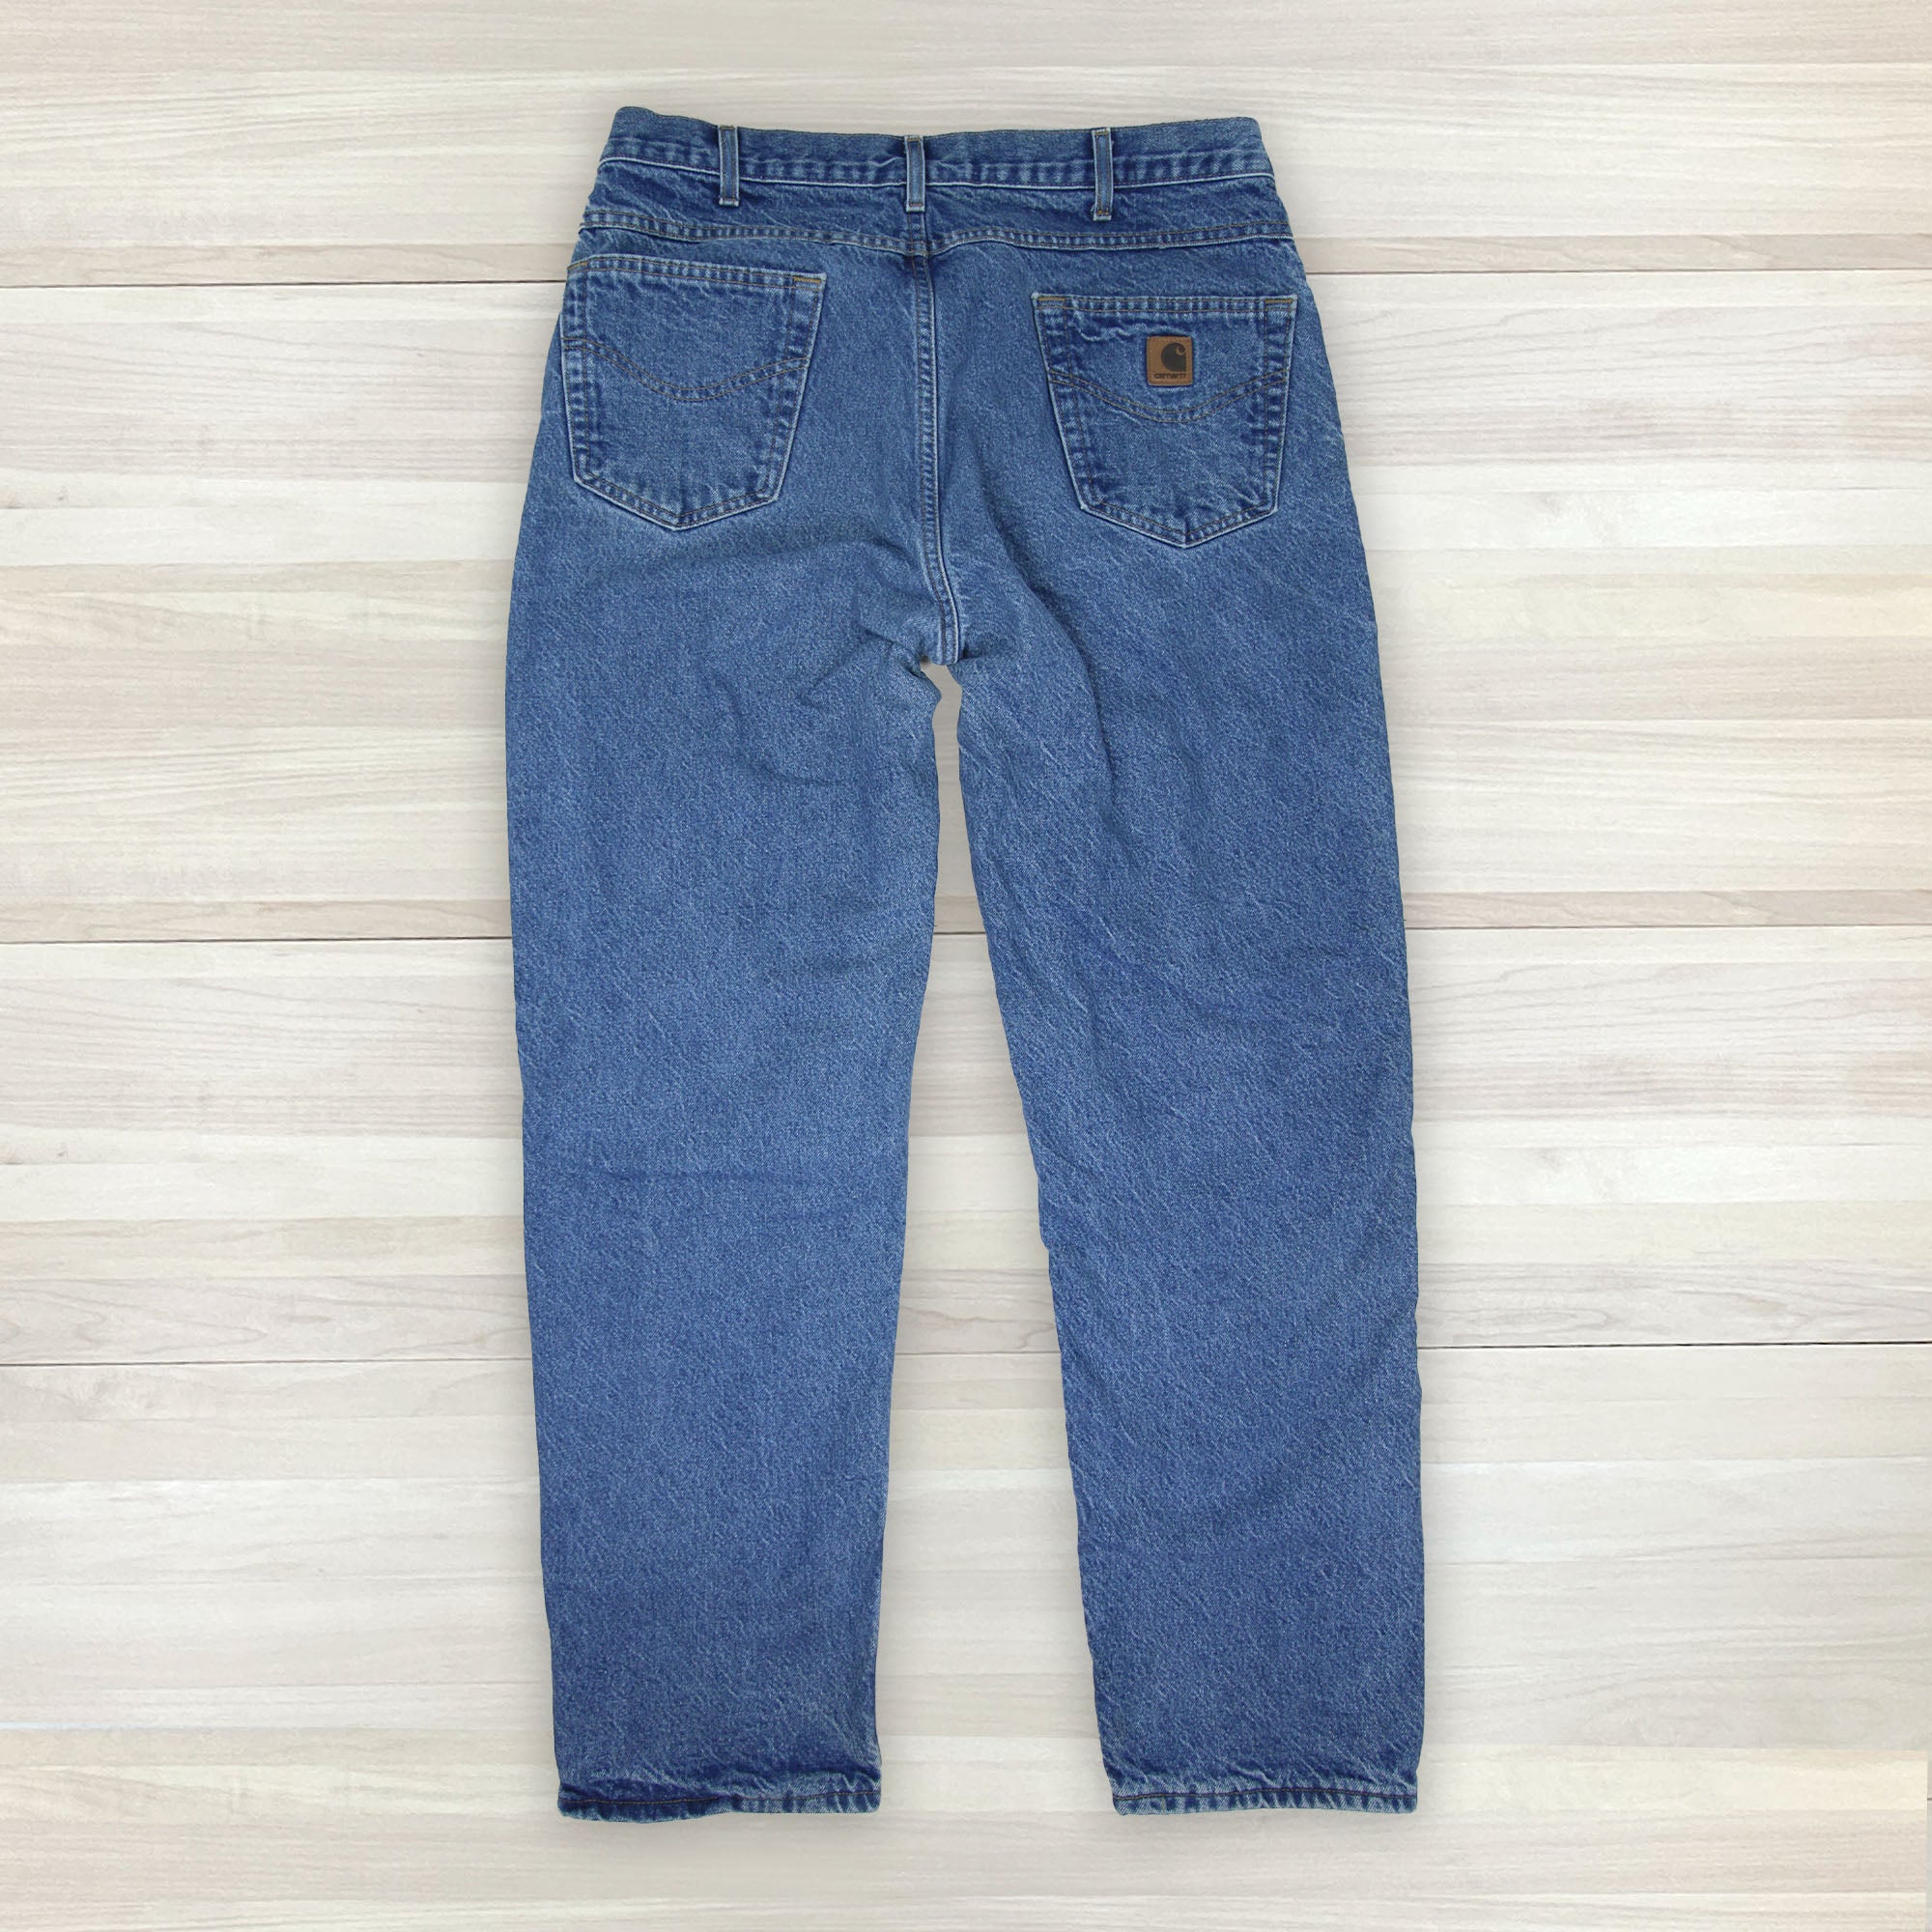 Jeans at Great Lakes Reclaimed Denim